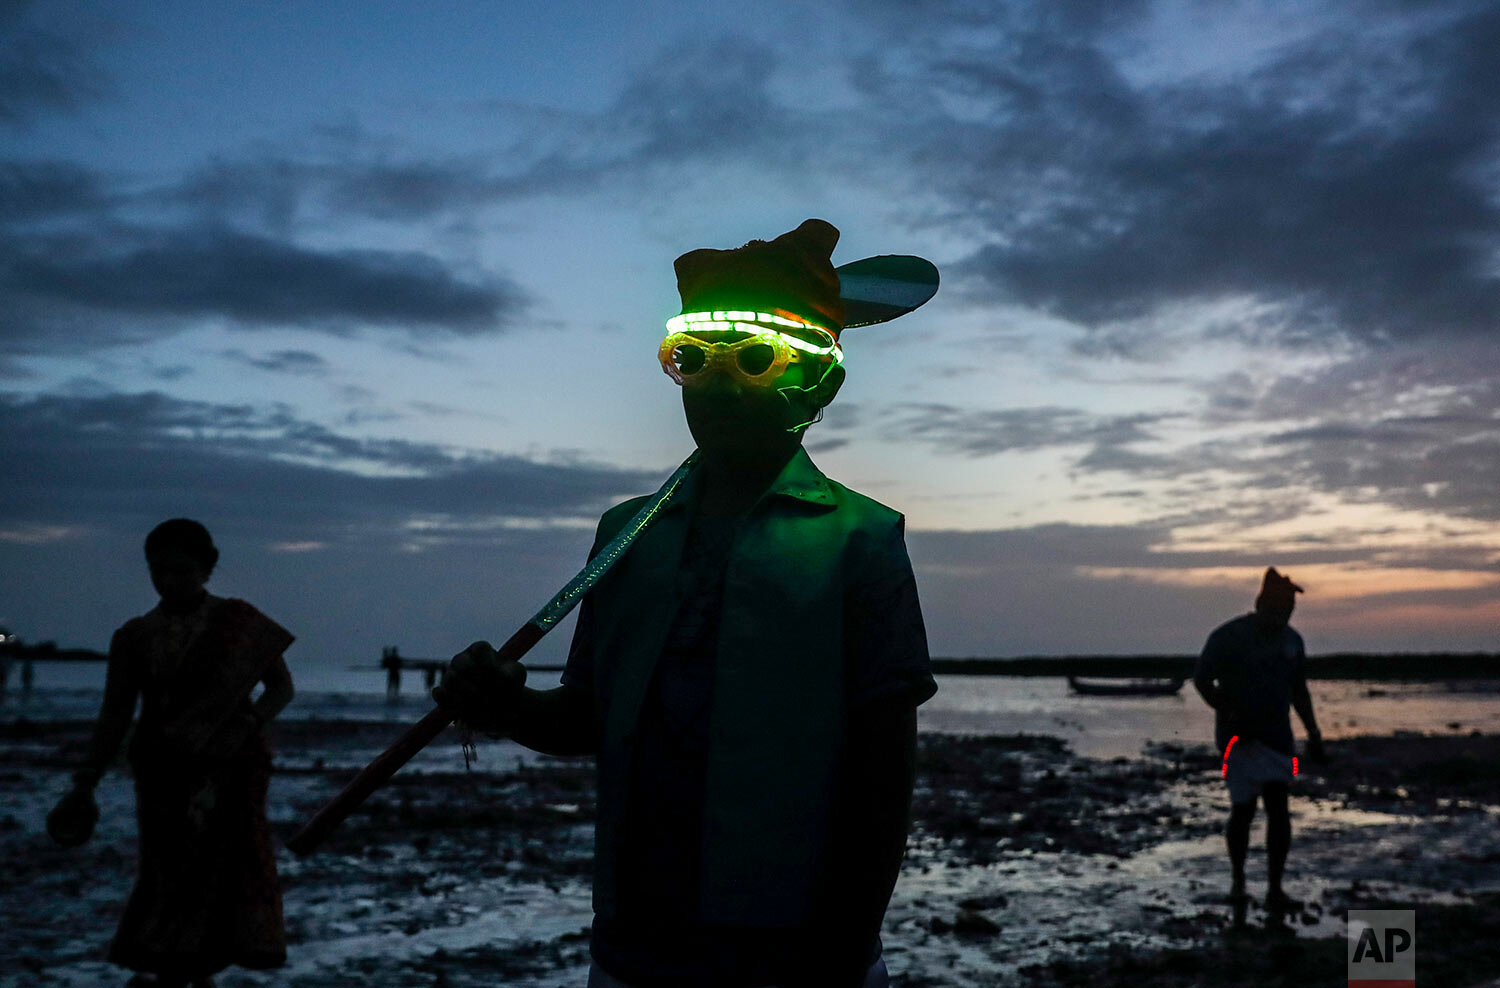  A boy from a fishing community posses for a picture along the shores of the Arabian Sea on the occasion of Narli Purnima Festival celebration in Mumbai, India, Sunday, Aug. 22, 2021. (AP Photo/Rafiq Maqbool) 